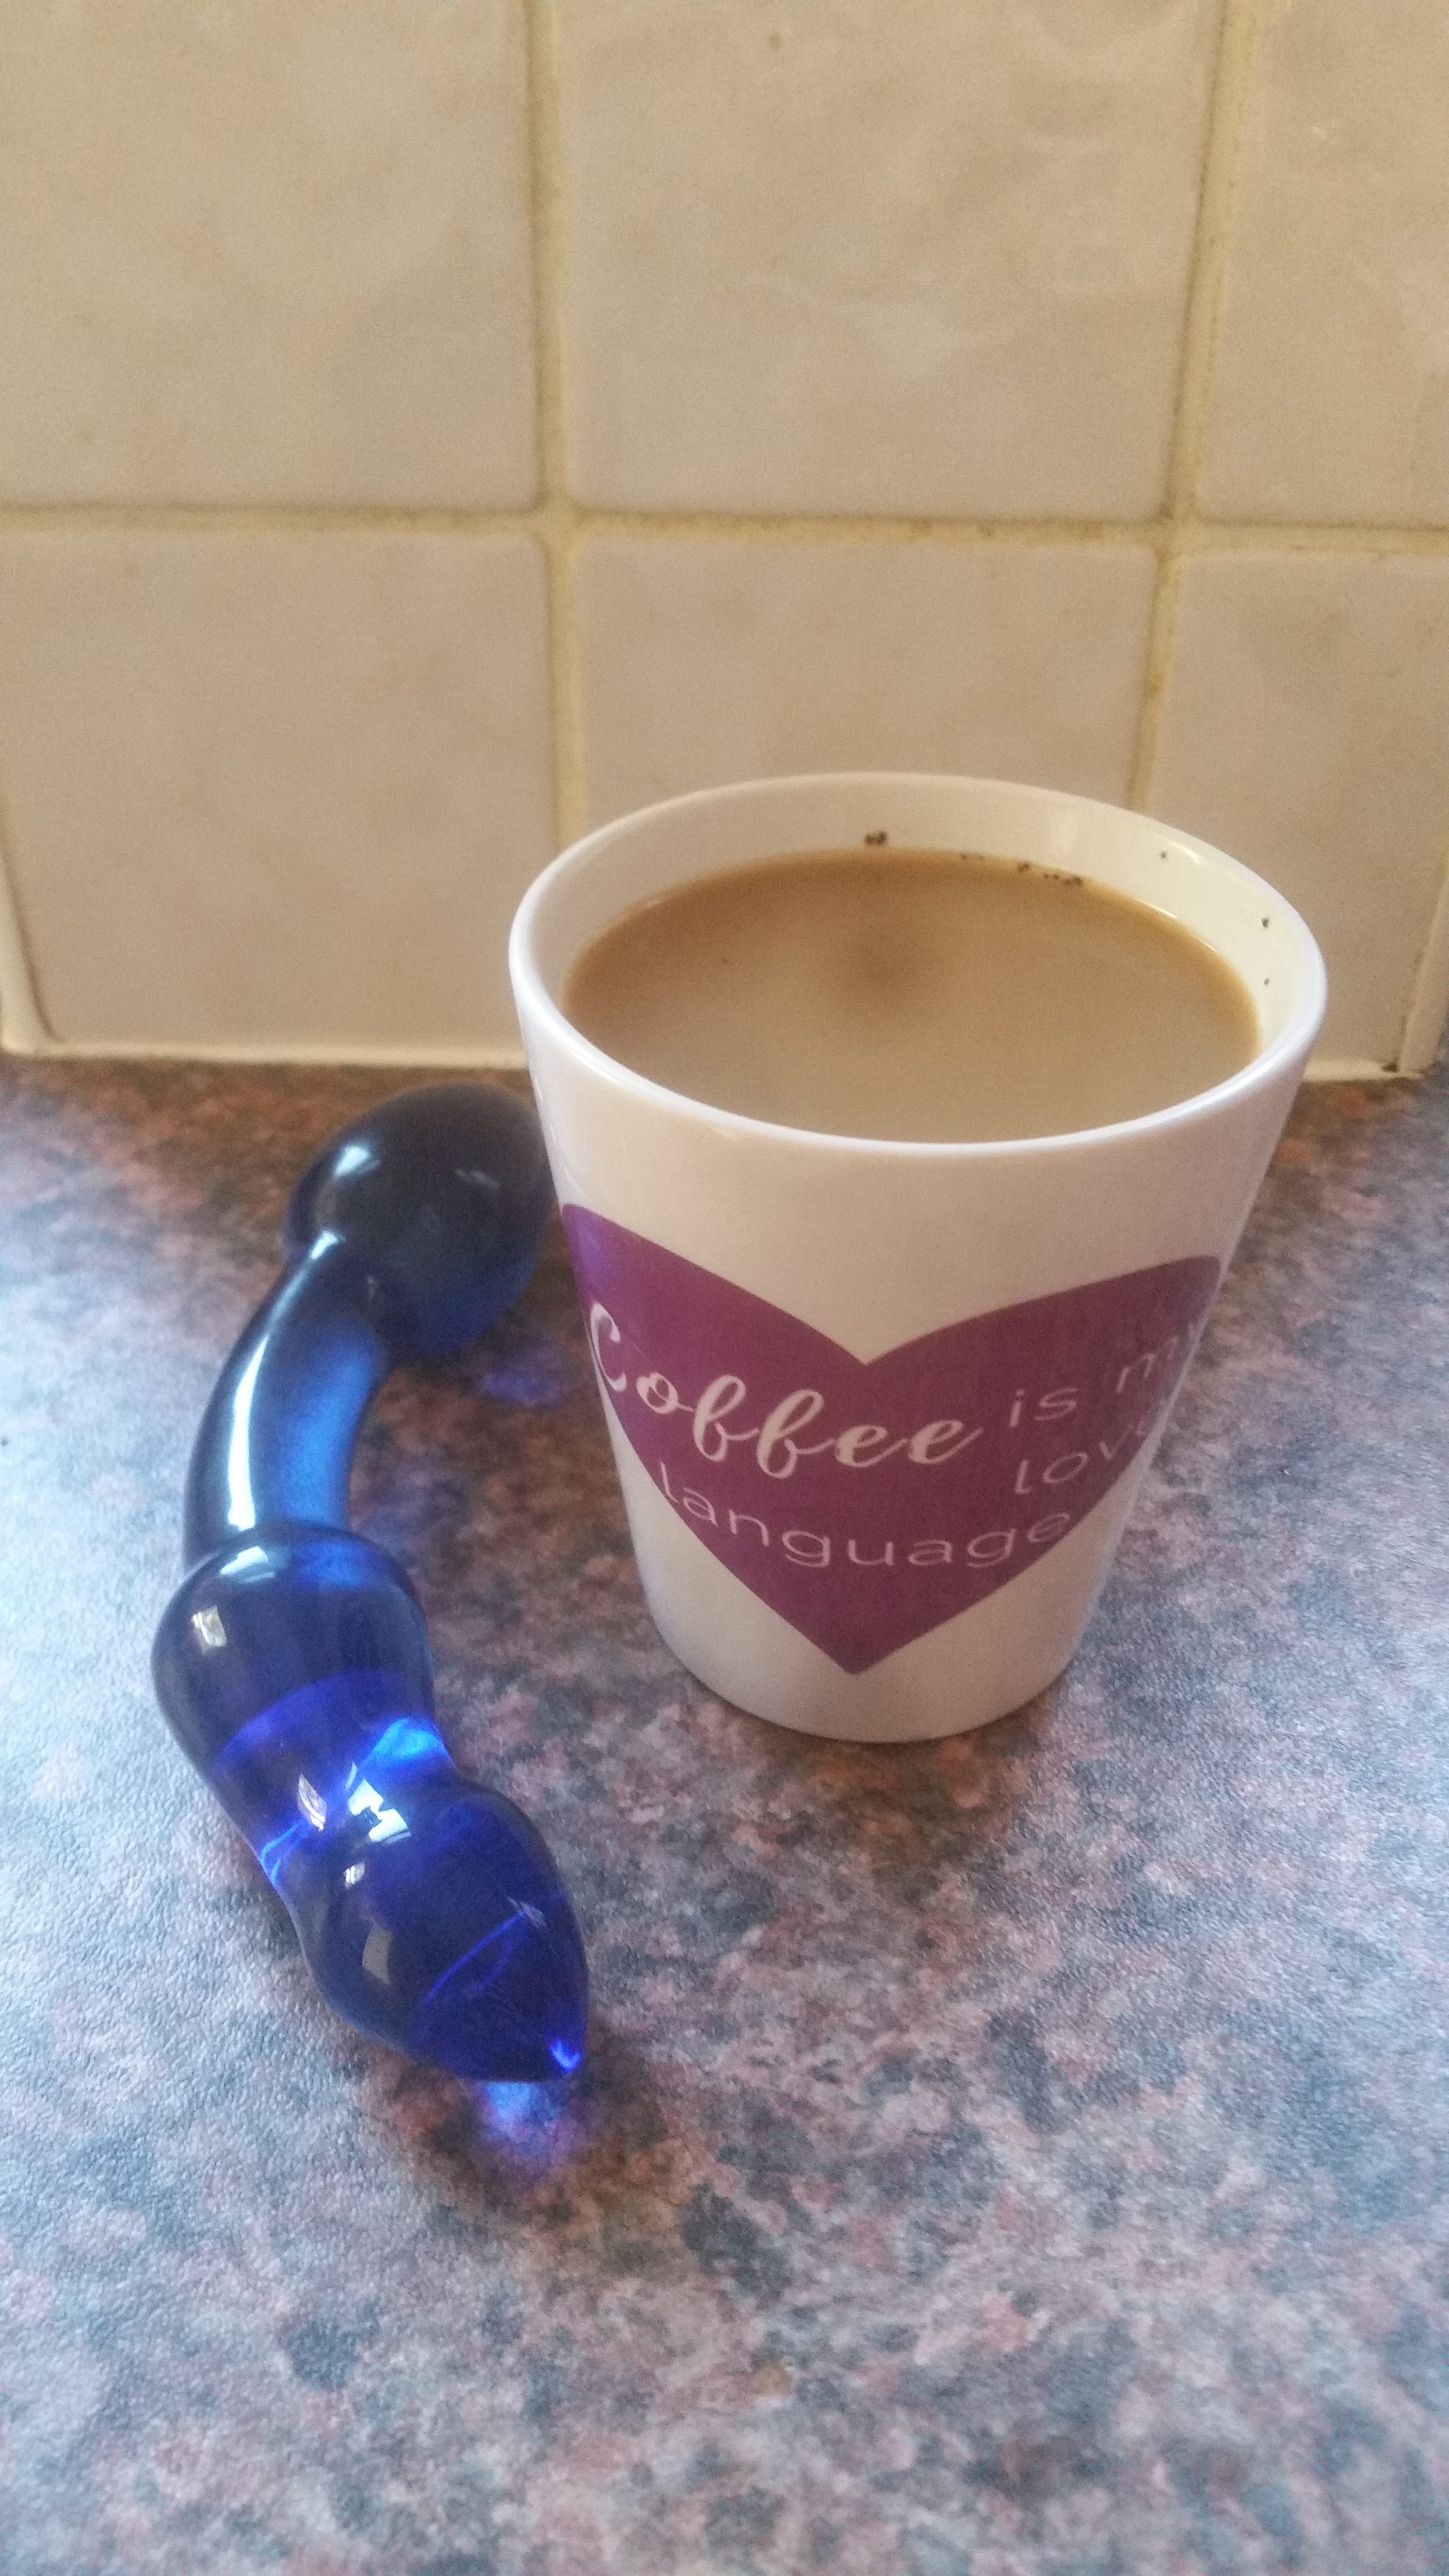 The Chrystalino blue glass double-ended dildo on my kitchen counter with a "Coffee is My Love Language" mug.